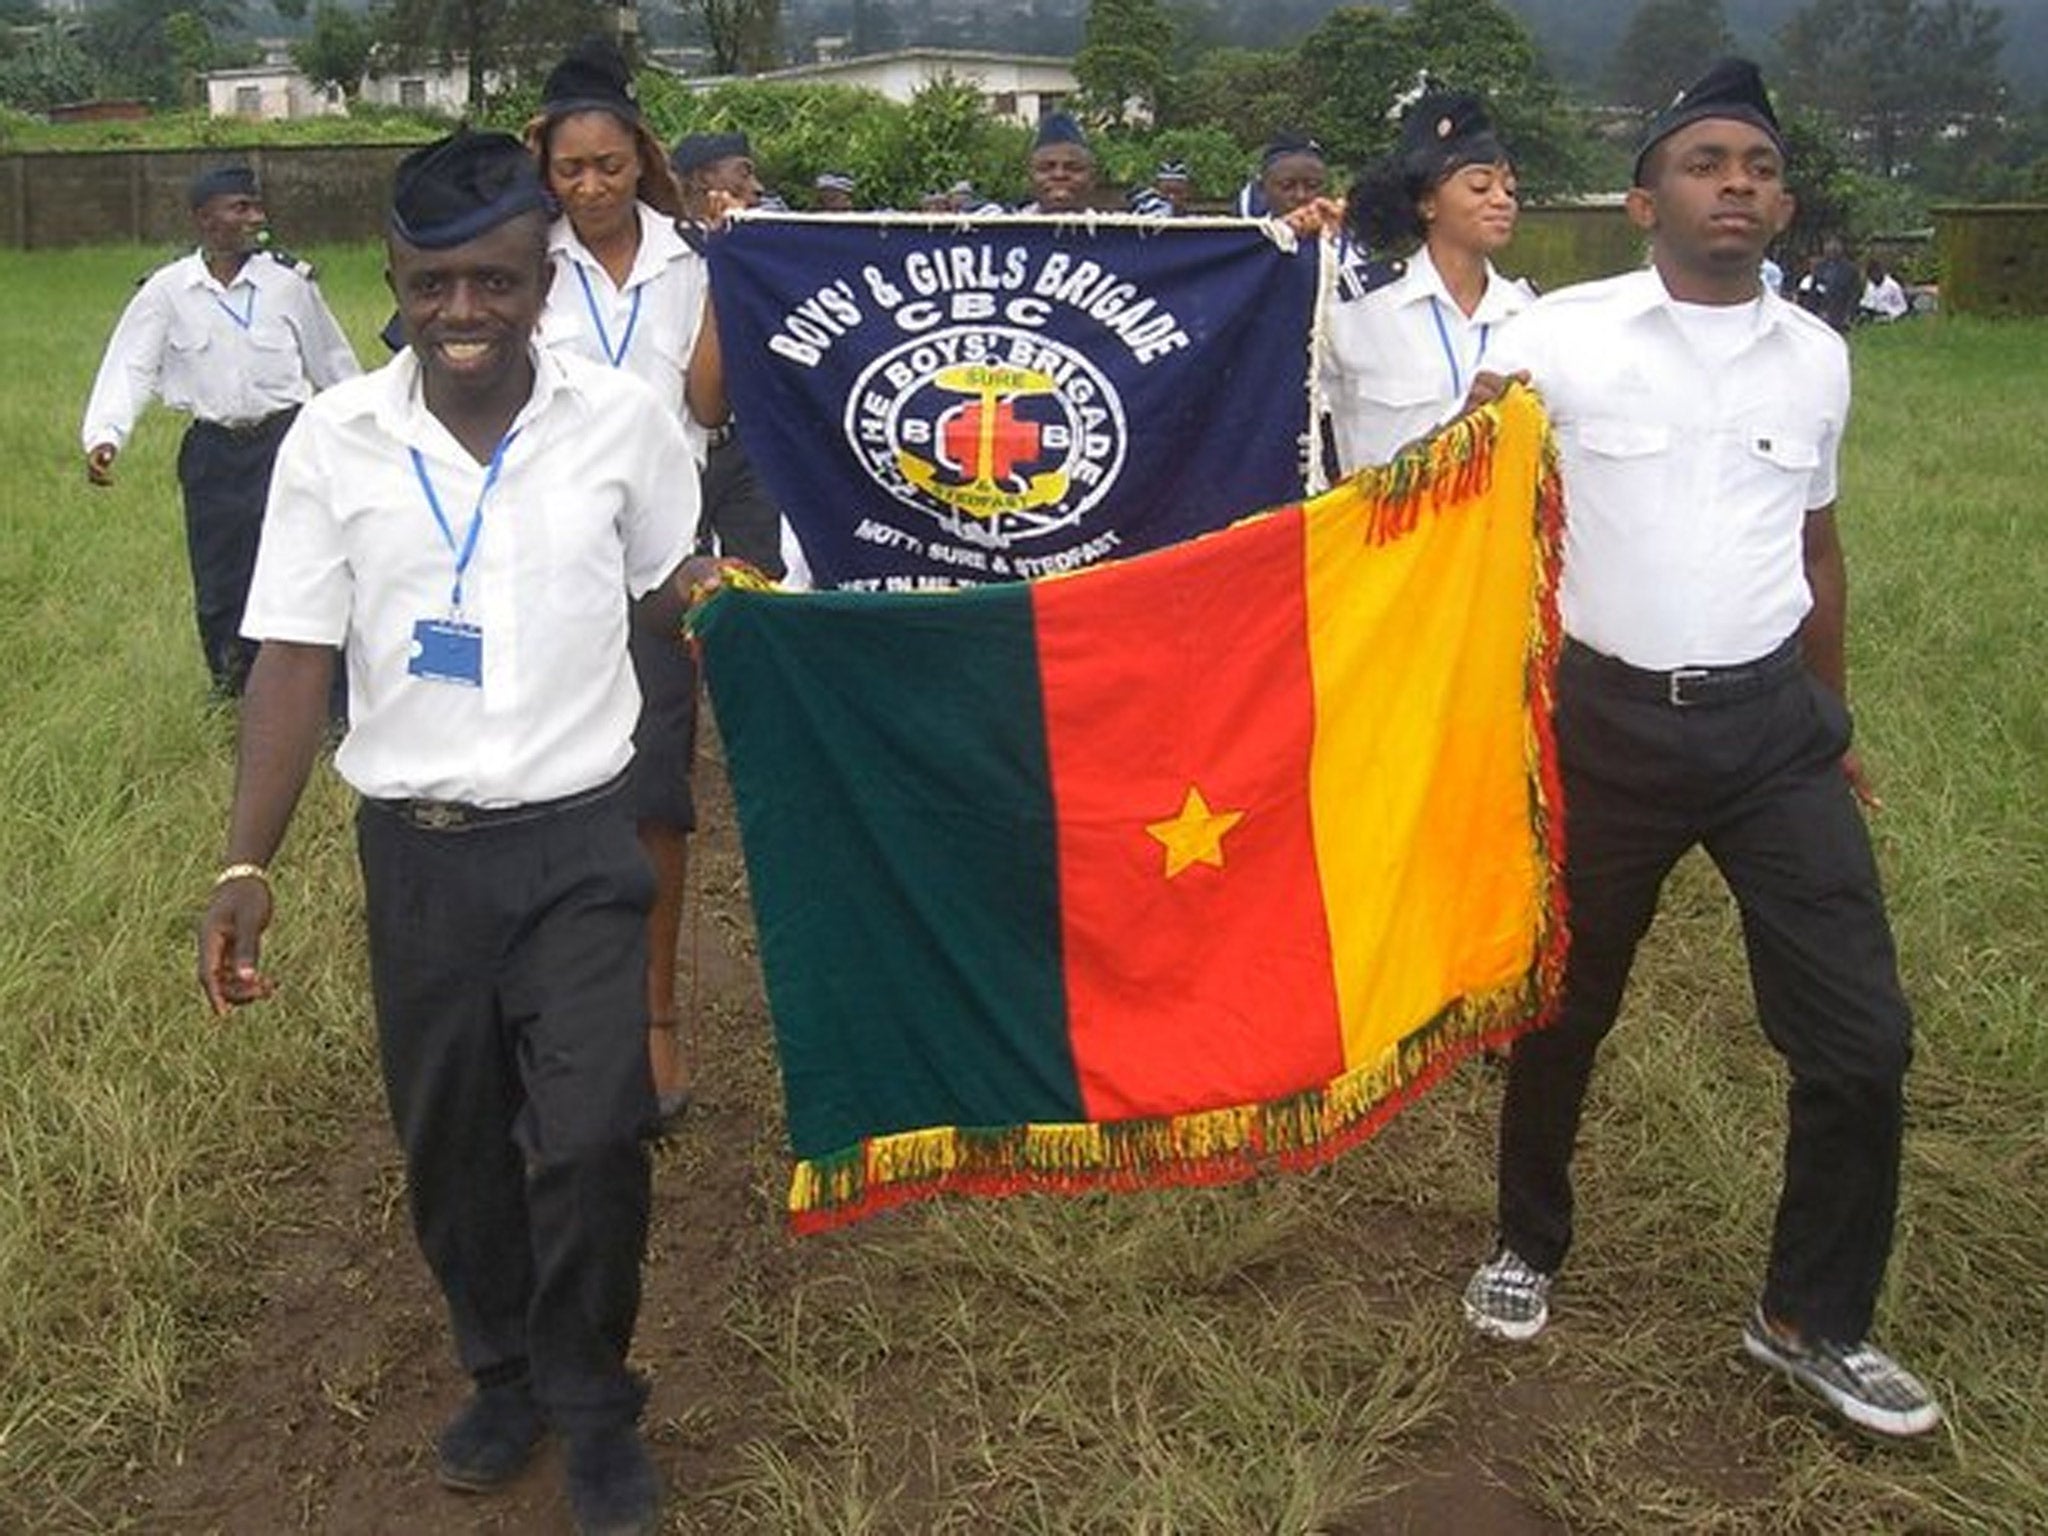 Cameroon’s Boys’ Brigade is among those barred